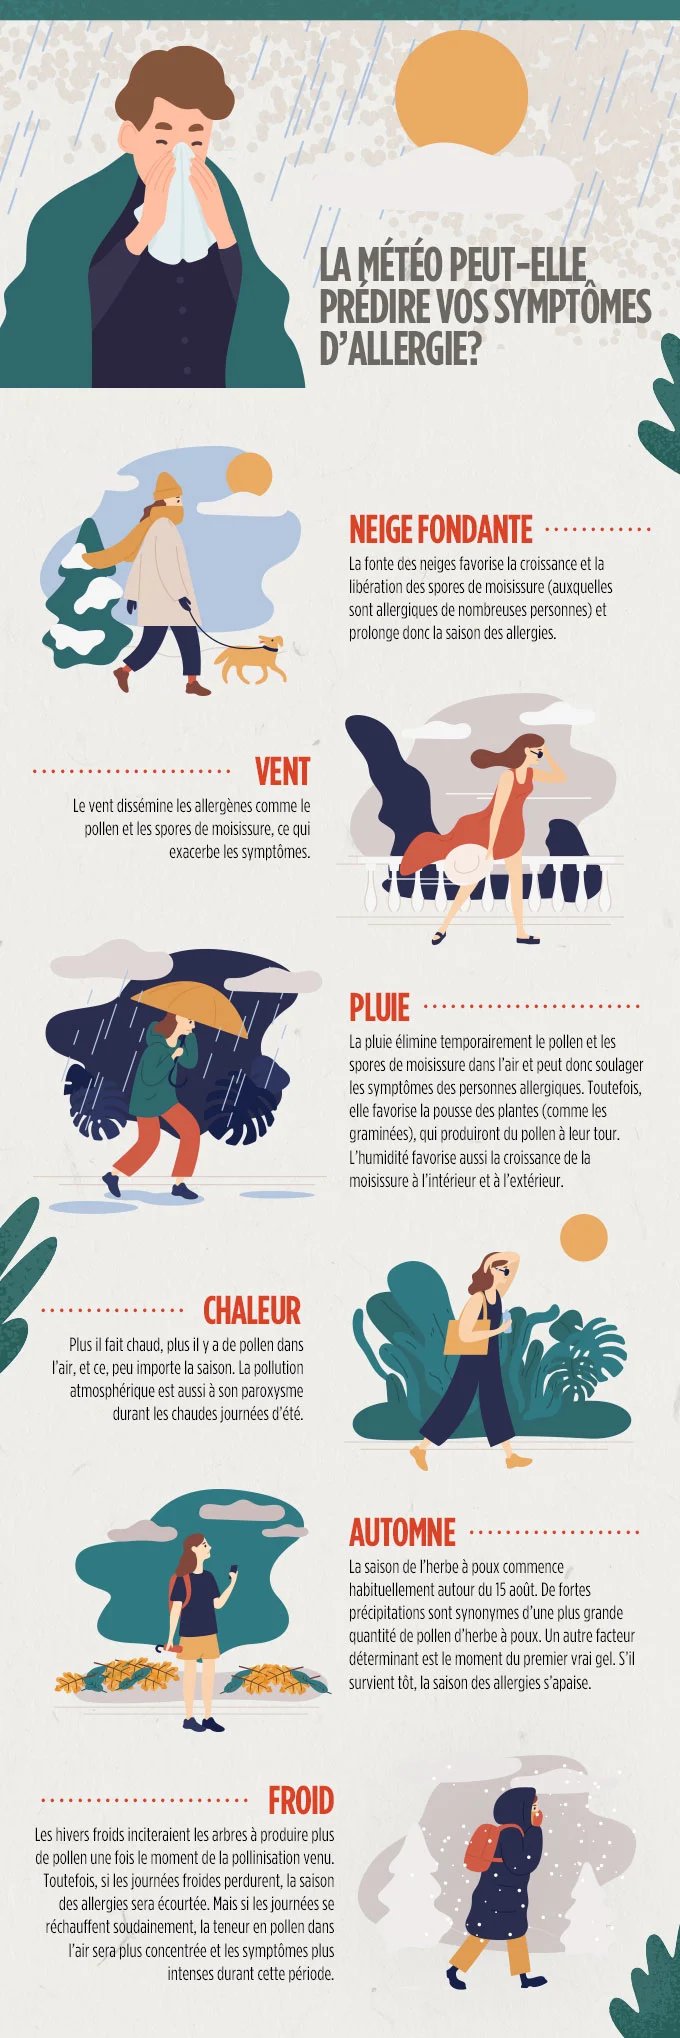 TWN-Article-3 Weather-&-Allergies-Infographic FR (2)